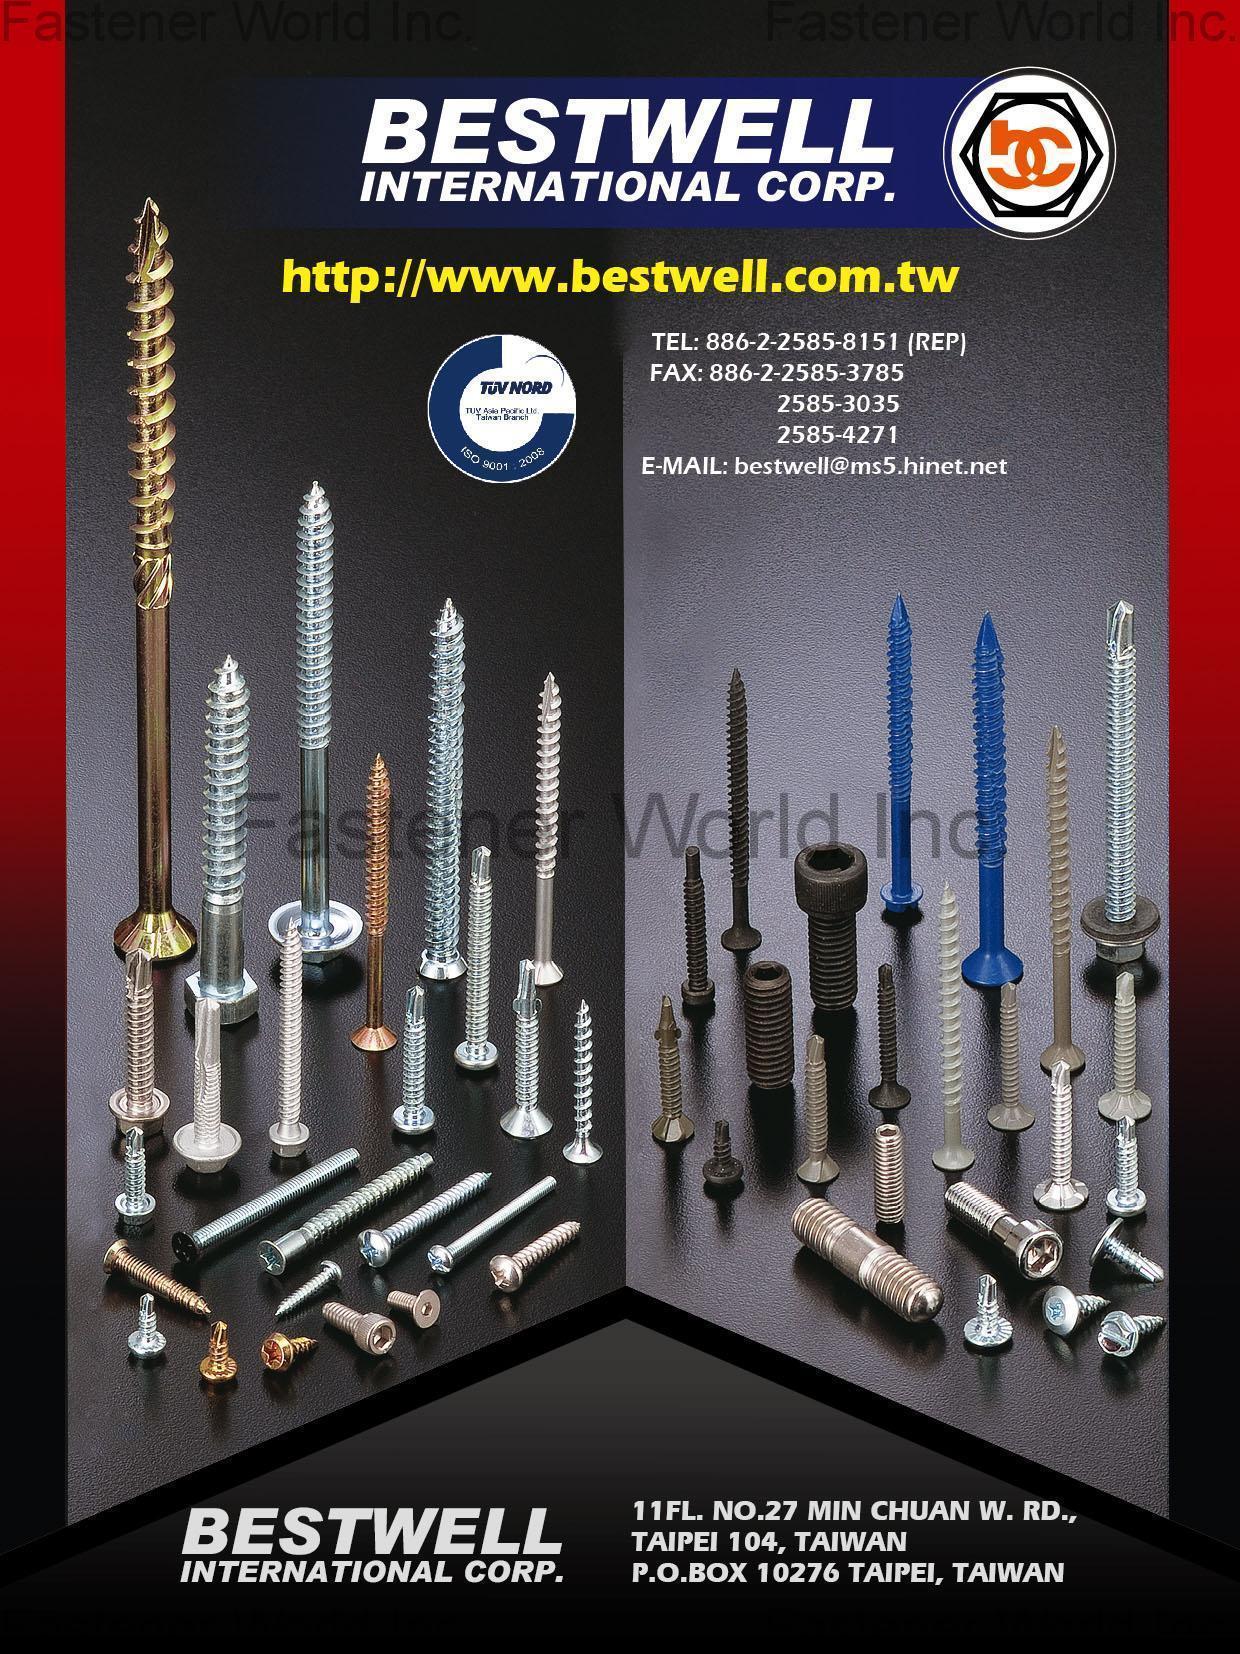 BESTWELL INTERNATIONAL CORP.  , HEX BOLT, SQUARE BOLT, CARRIAGE BOLT, FLANGE BOLT, SOCKET HEAD CAP SCREW, SET SCREW, SHACKLE BOLT, CUP BOLT, ALL THREAD STUD, OVAL NECK, SQUARE NECK, GAS BOLT, T-HEAD BOLT, SINGLE END STUD, T/S & M/S, SELF DRILLING SCREW, DWS & CHIPBOARD SCREW, SCREW WITH BONDER WASHER, SECURITY SCREW, SEM SCREW, SEPCIAL SERRATION SCREW, NUT, LOCK NUT, TEFLON COATING NUT, NON-STANDARD & OTHERS, FLAT WASHER, LOCK WASHER, SQUARE WASHER, SOLID WASHER, ANCHOR, STAMPING, SPECIAL FASTENERS, D-RING & RINGS, CNC ITEMS, WIRE MESH, BUTT SEAM SPACER, PLASTIC OR RUBBER PARTS, POWDER METALLURGY, SPRING & CLIP , Chipboard Screws